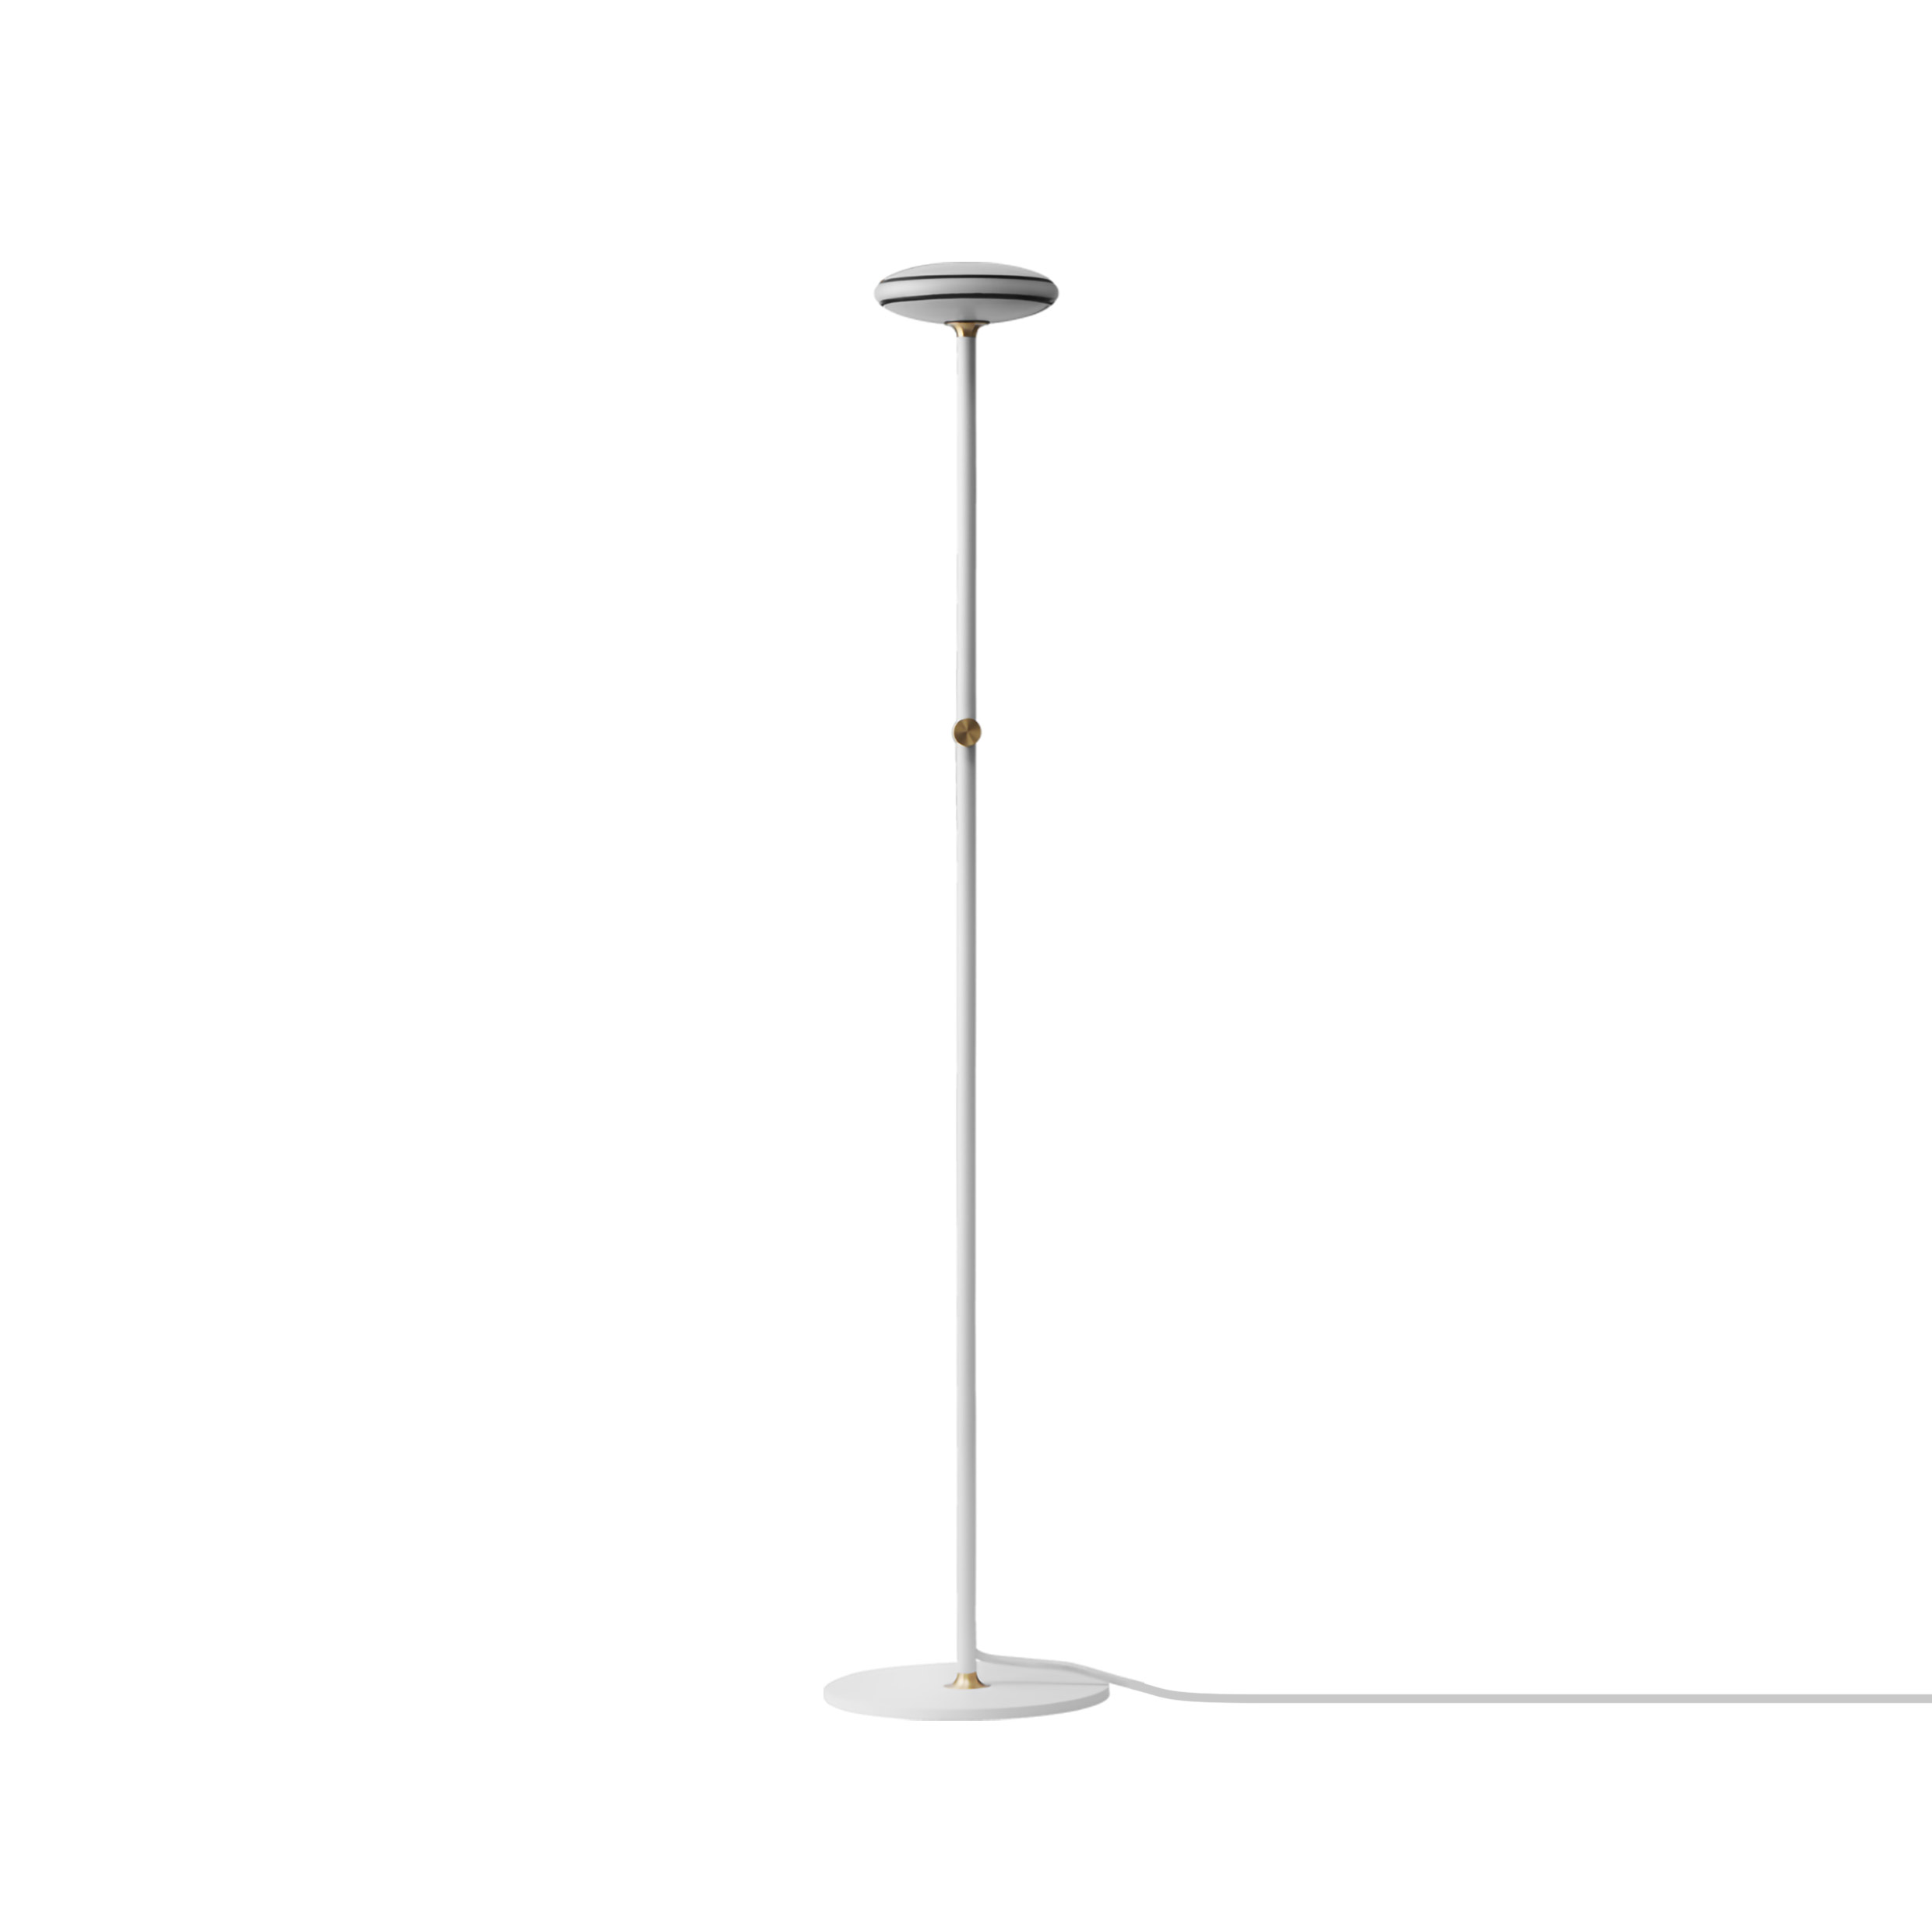 SHADE // ØS1 - FLOOR LAMP | SMART LED LIGHT - WITHOUT REMOTE CONTROL - WHITE